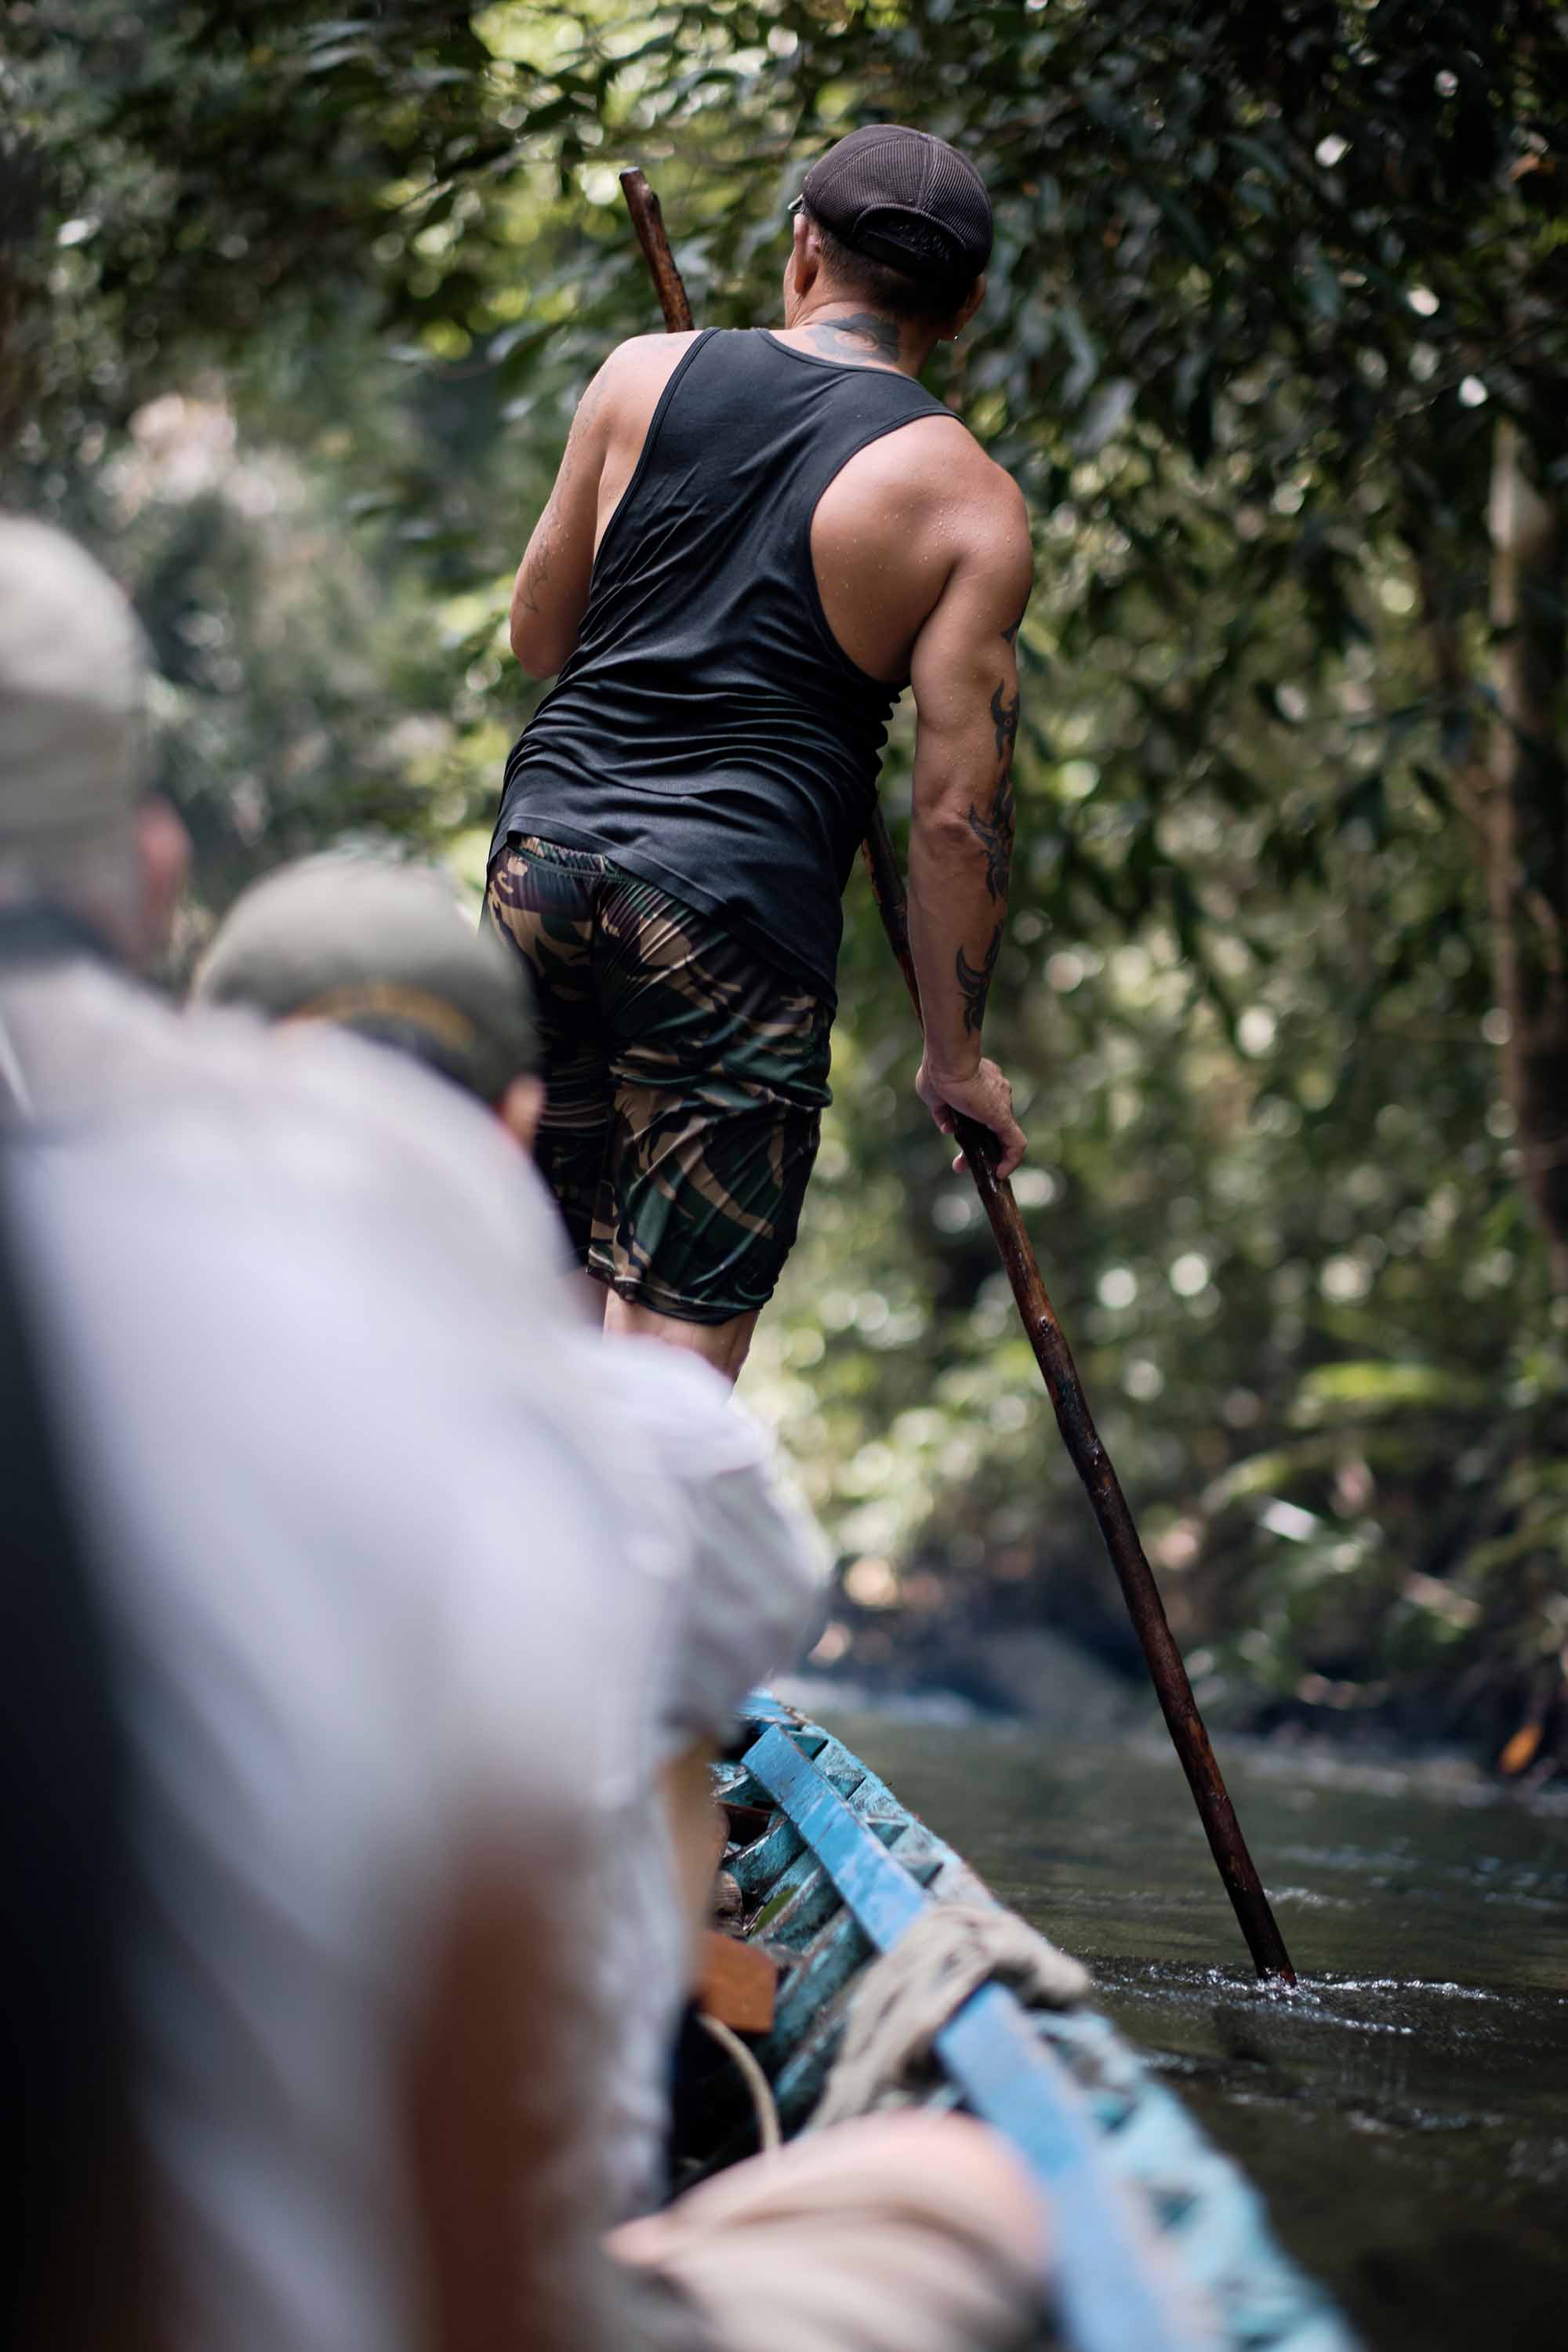 A man touches the river bed with a long stick to guide the canoe as he leads a tour of the Sungai Utik forest.